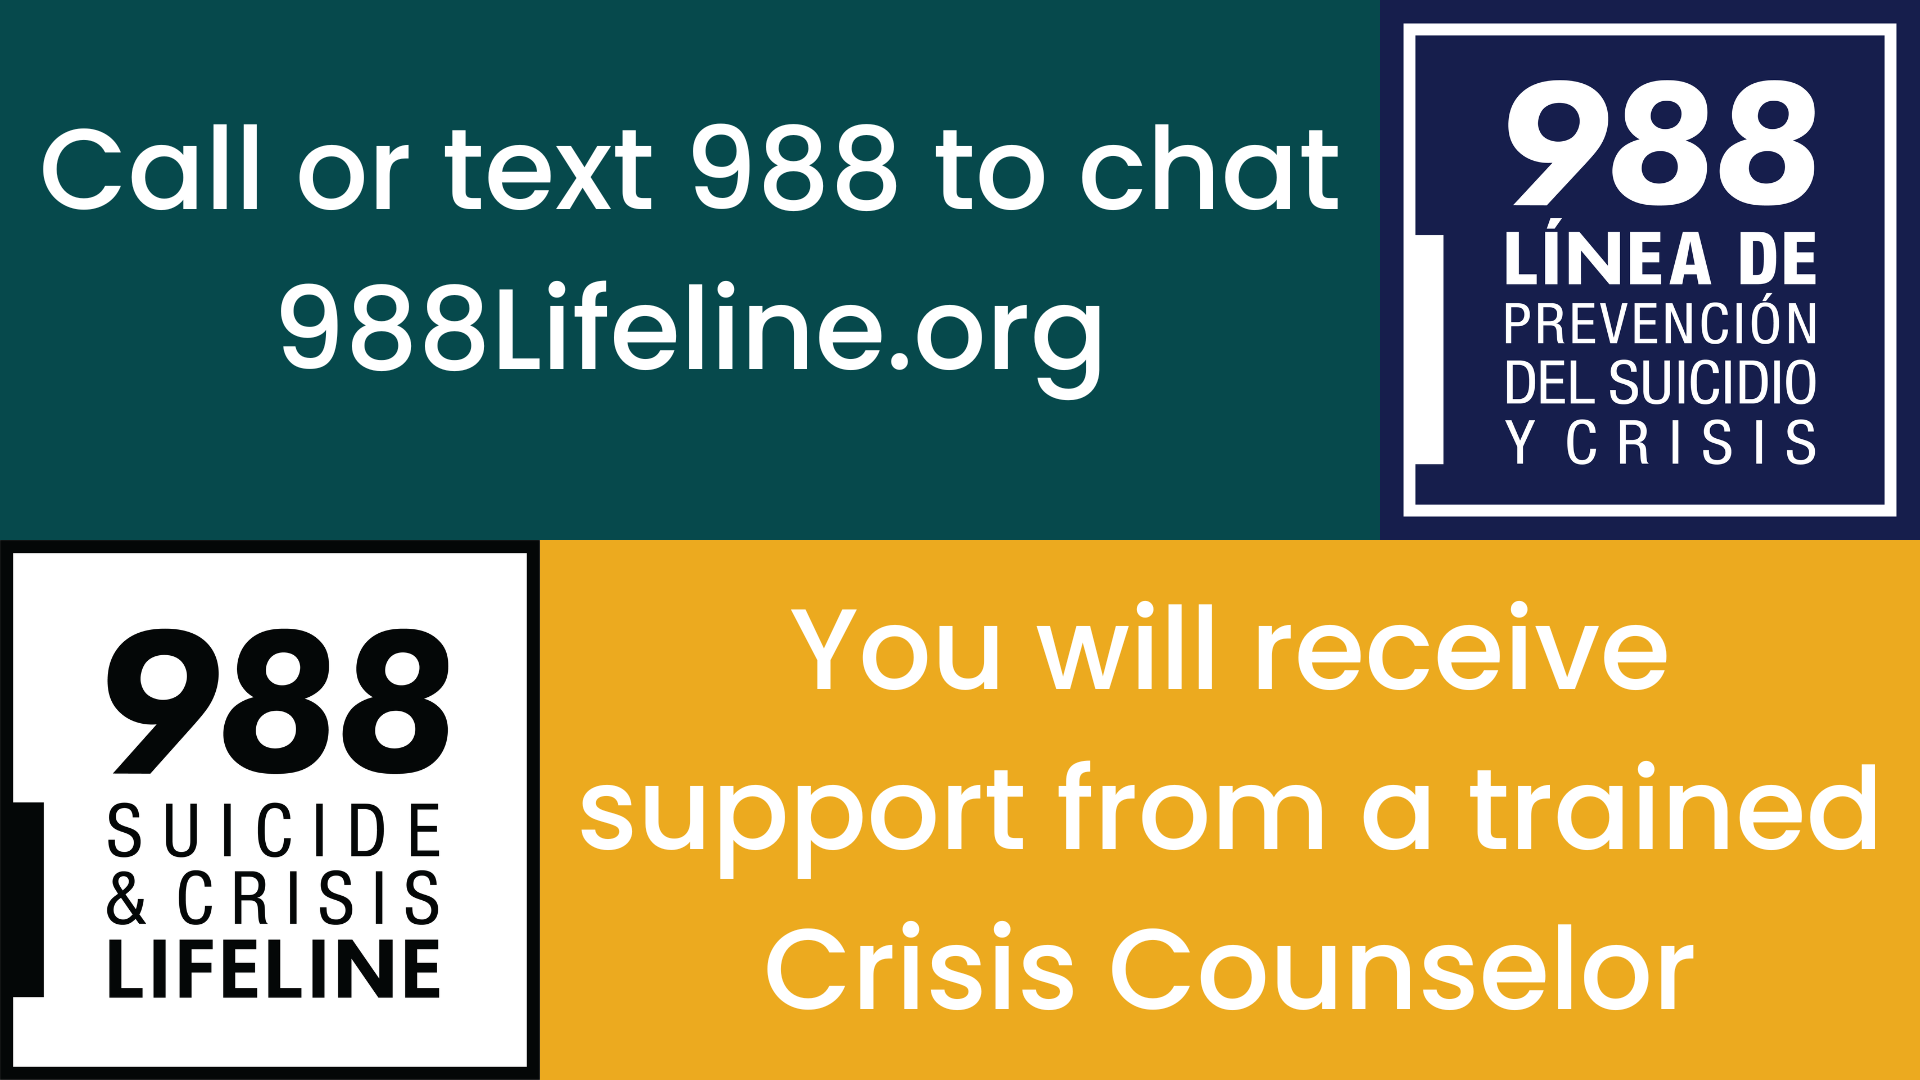 call or text 988 to receive crisis counseling support